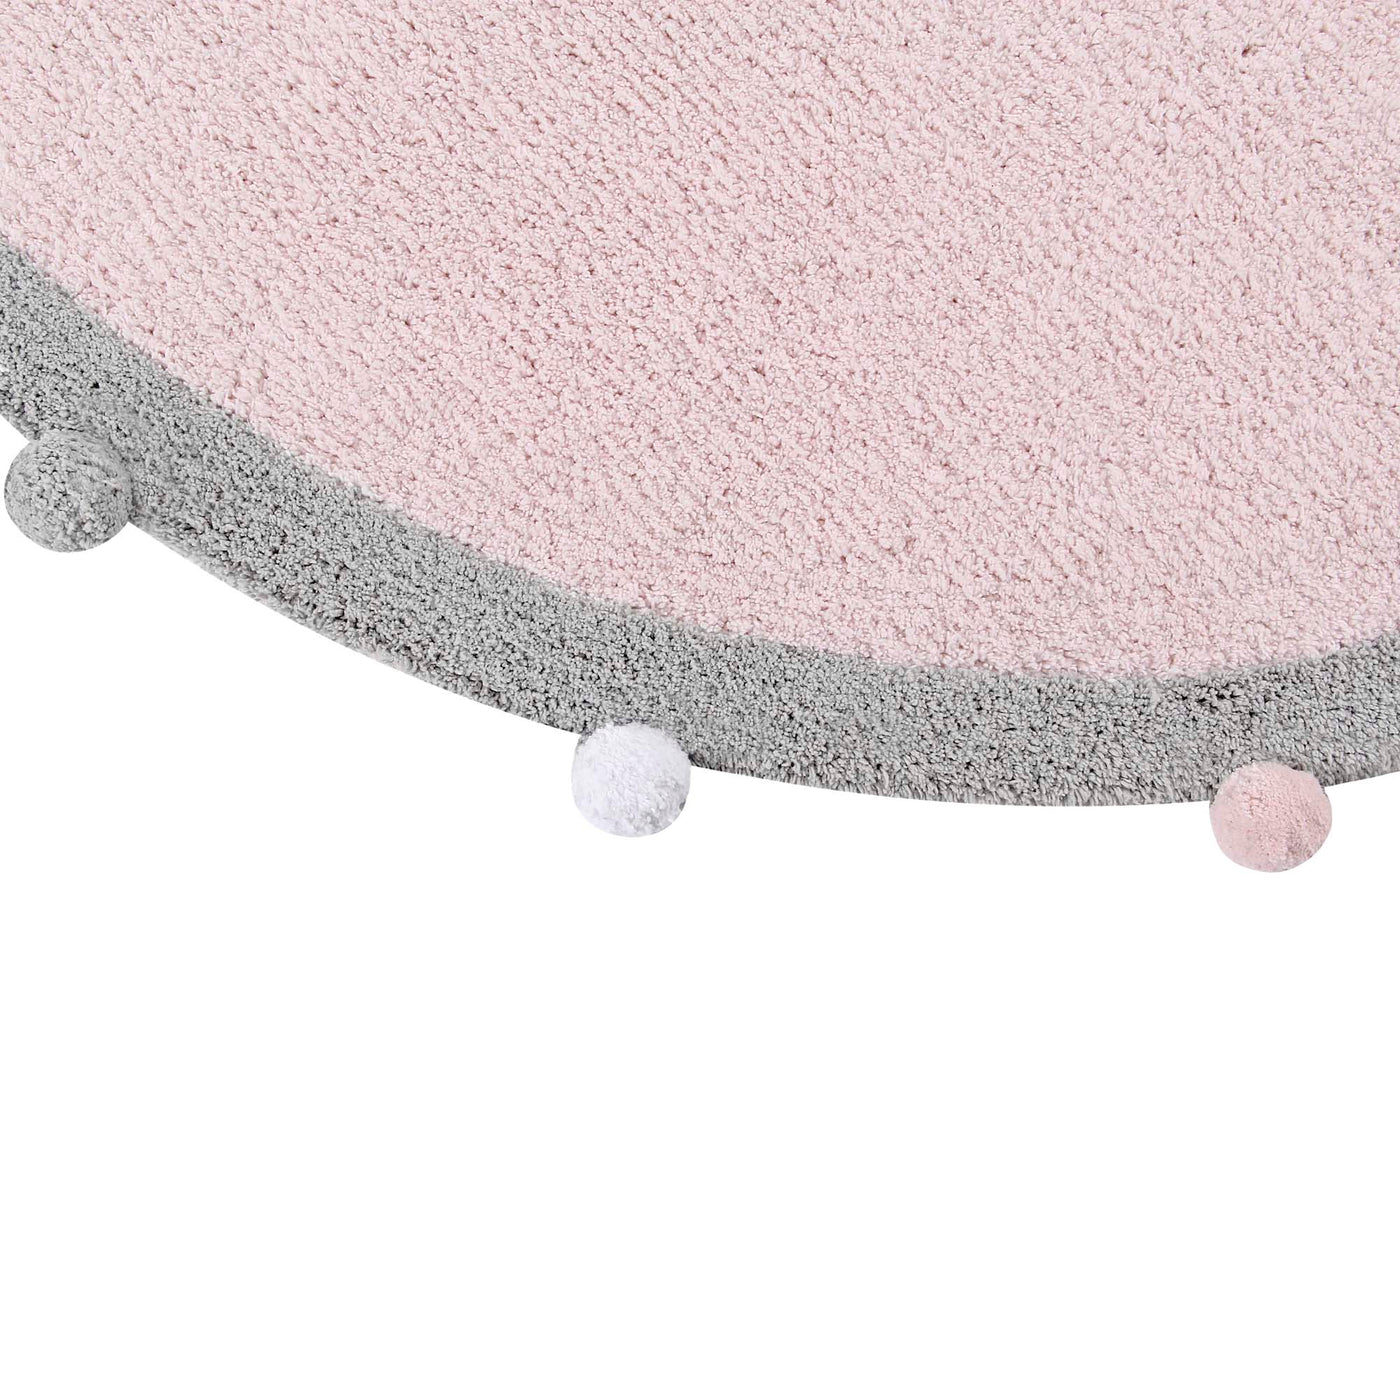 Lorena Canals Machine Washable Rug - Bubbly Soft Pink